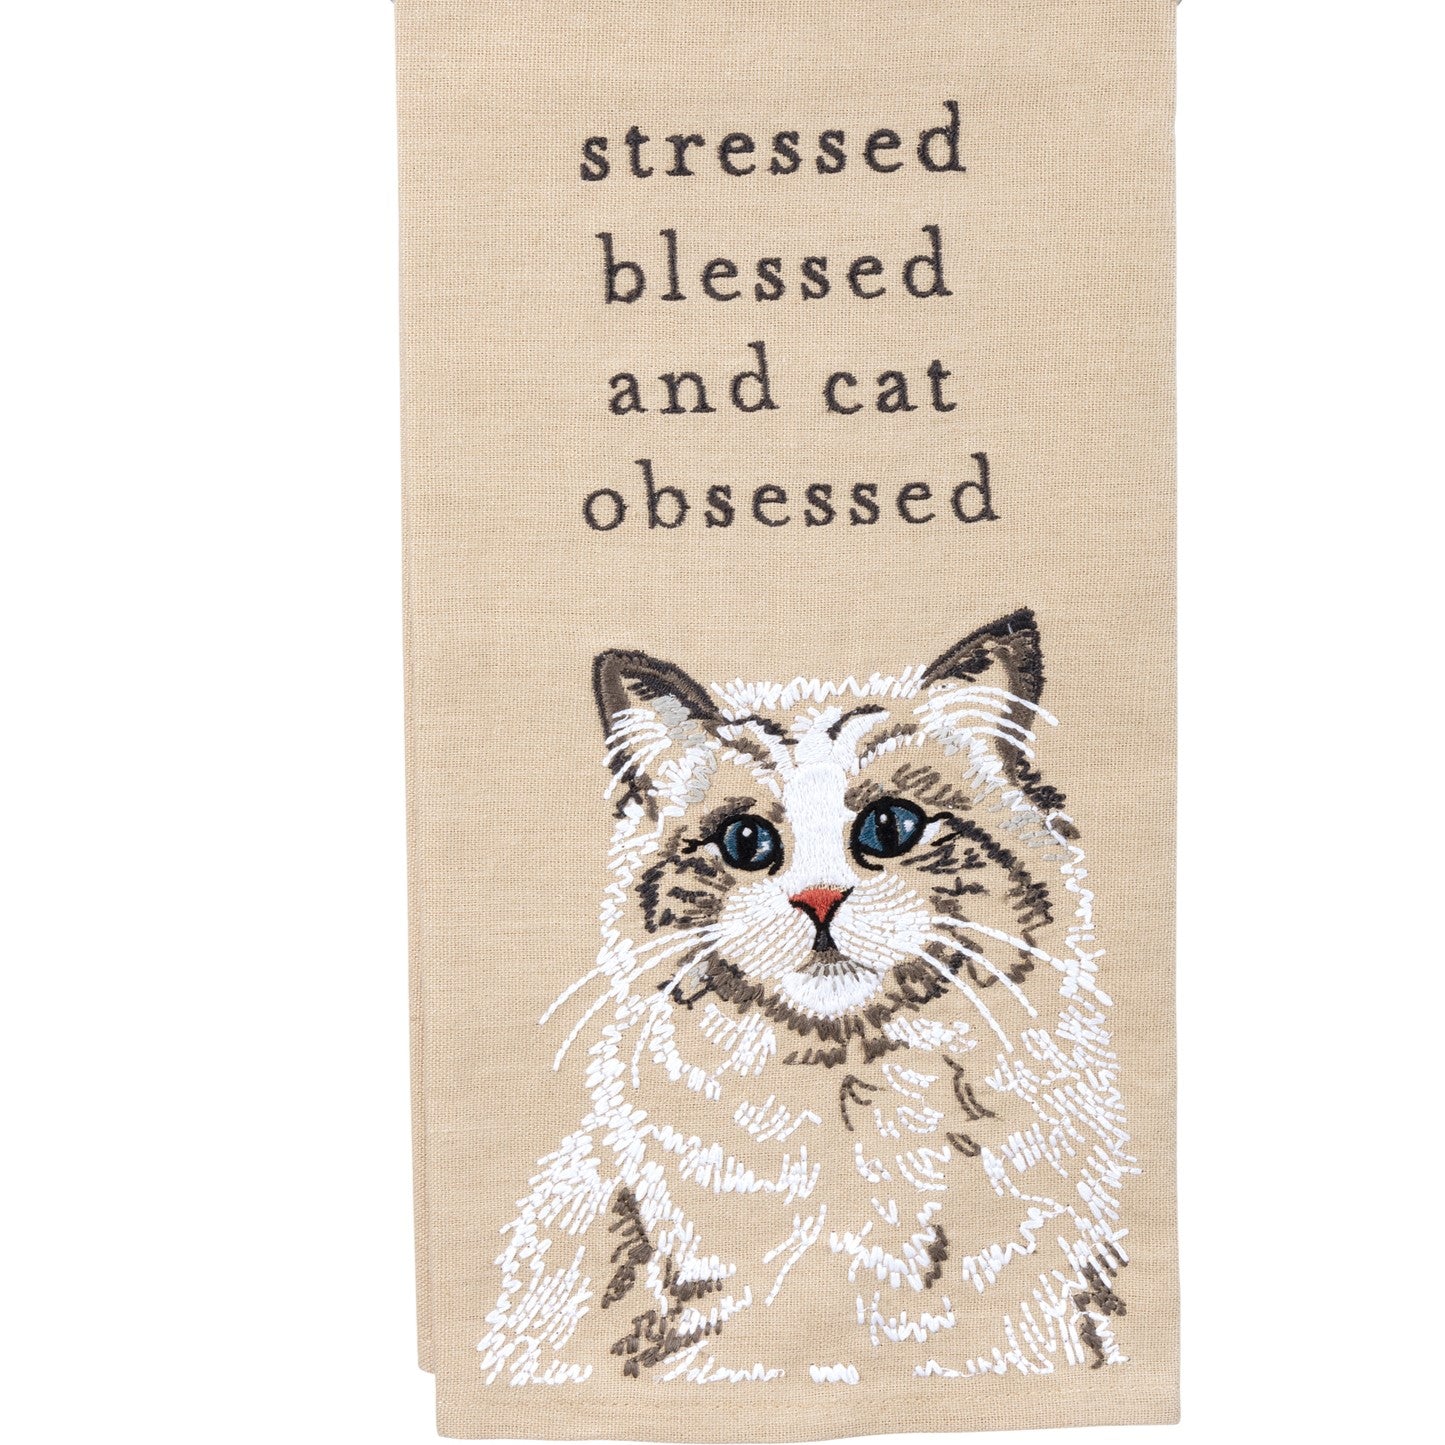 Cat themed kitchen towel - "stressed blessed and cat obsessed" - PRE- ORDER